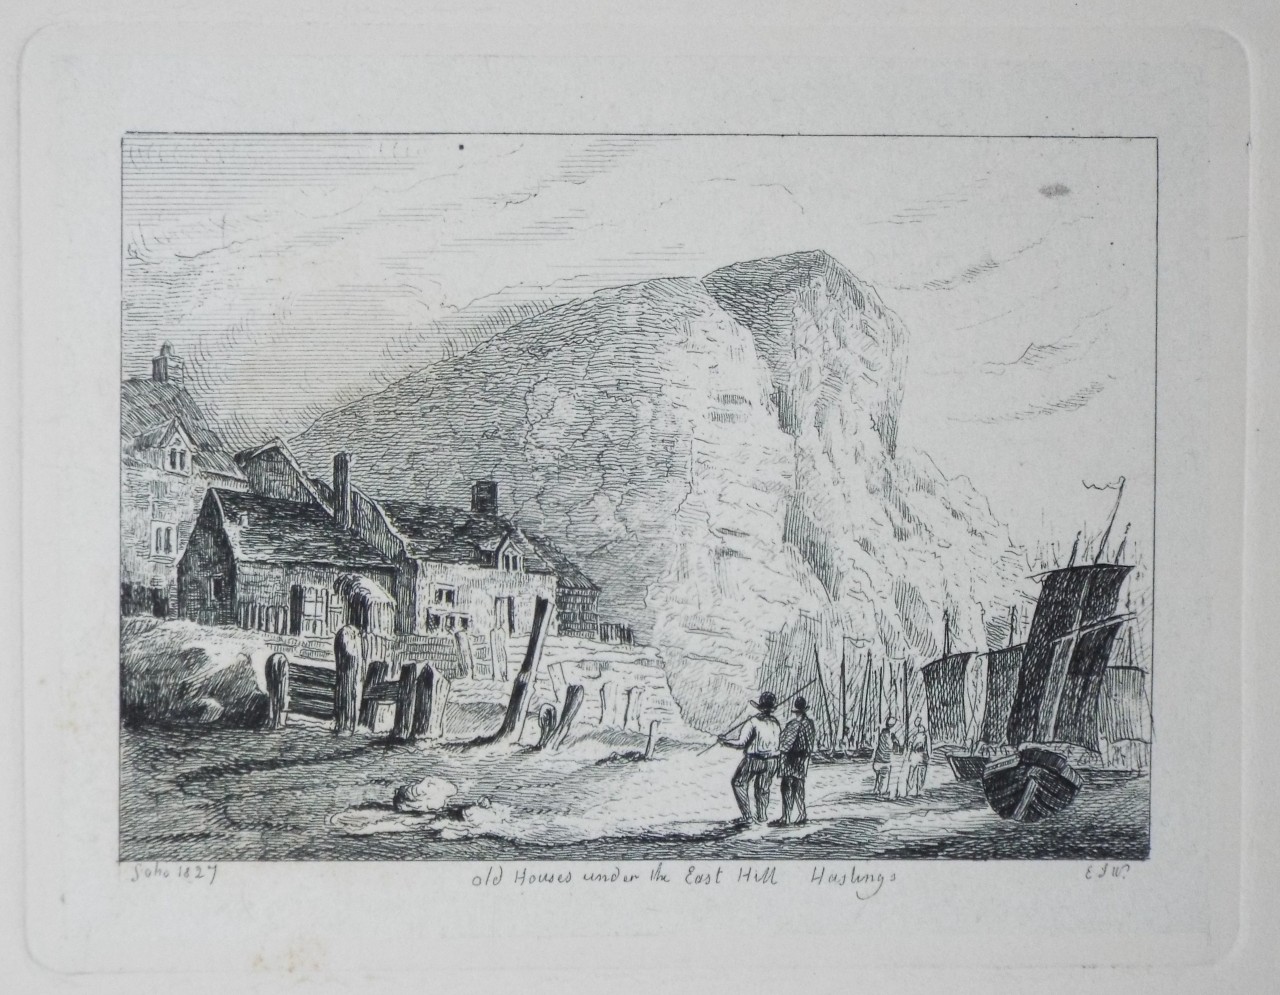 Etching - Old Houses under the East Hill Hastings - Wilkinson